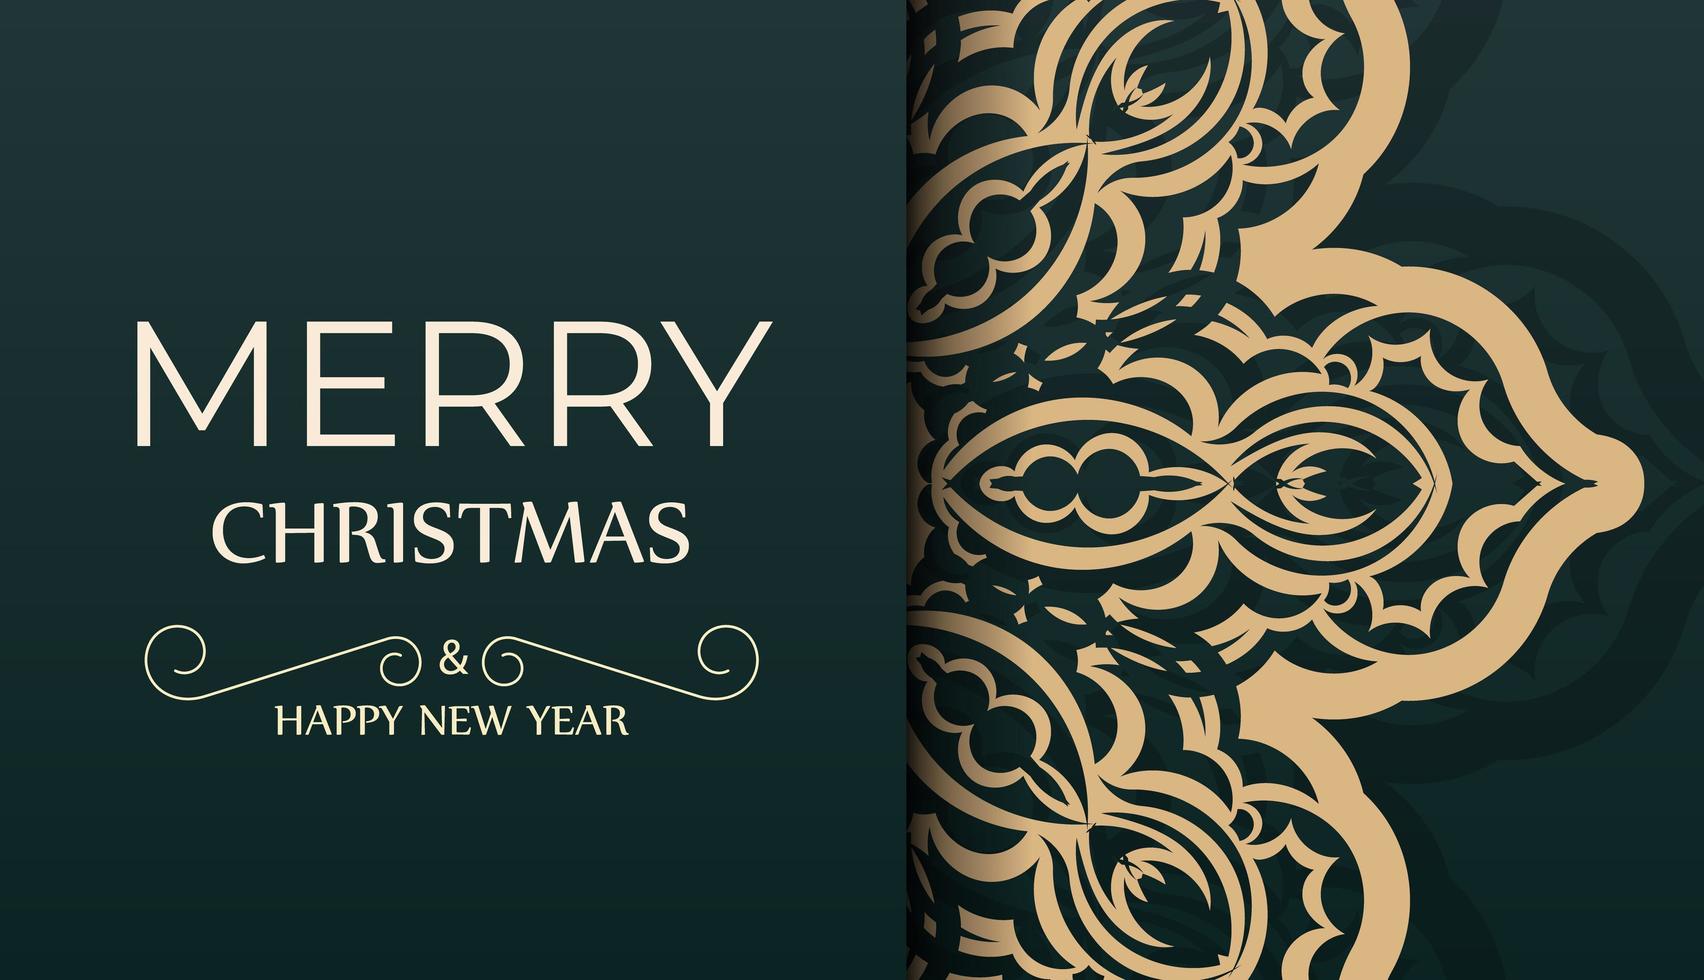 Merry christmas dark green flyer with vintage yellow ornament vector